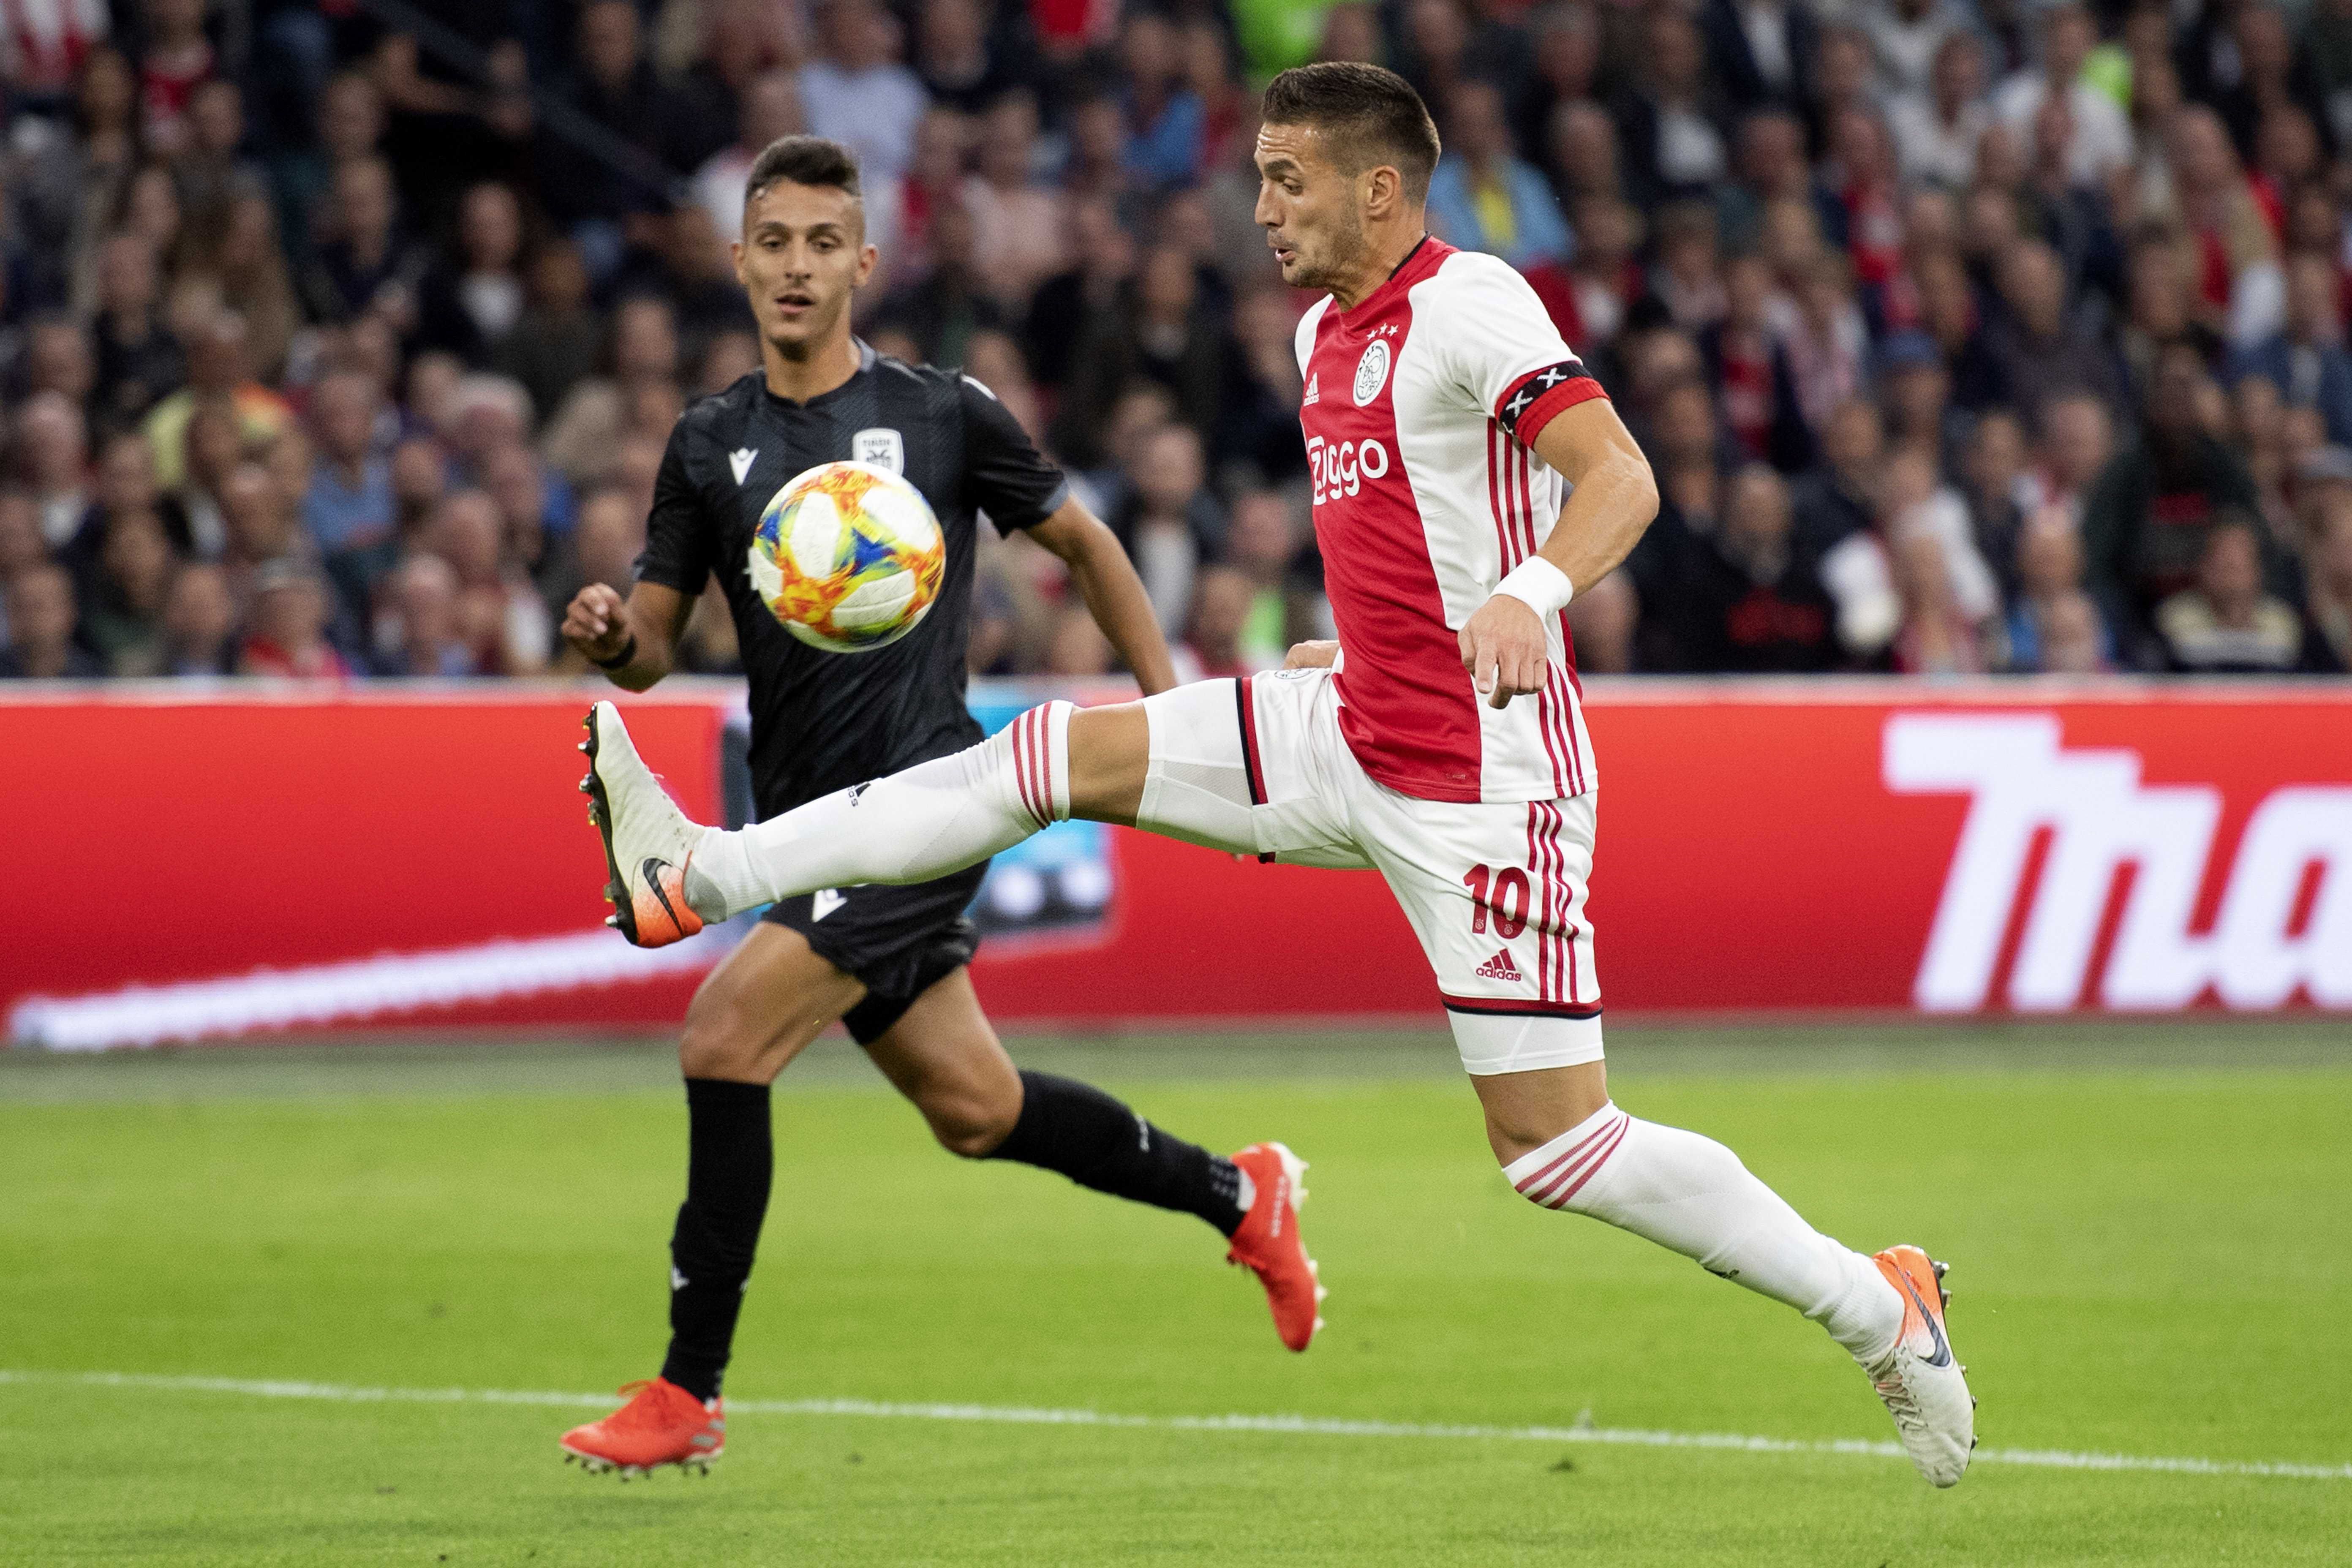 epa07771862 Dusan Tadic of Ajax Amsterdam (R) in action with Dimitris Giannoulis of PAOK Saloniki during the UEFA Champions League third qualifying round, second leg soccer match between Ajax Amsterdam and PAOK Saloniki, in Amsterdam, The Netherlands, 13 August 2019.  EPA/OLAF KRAAK